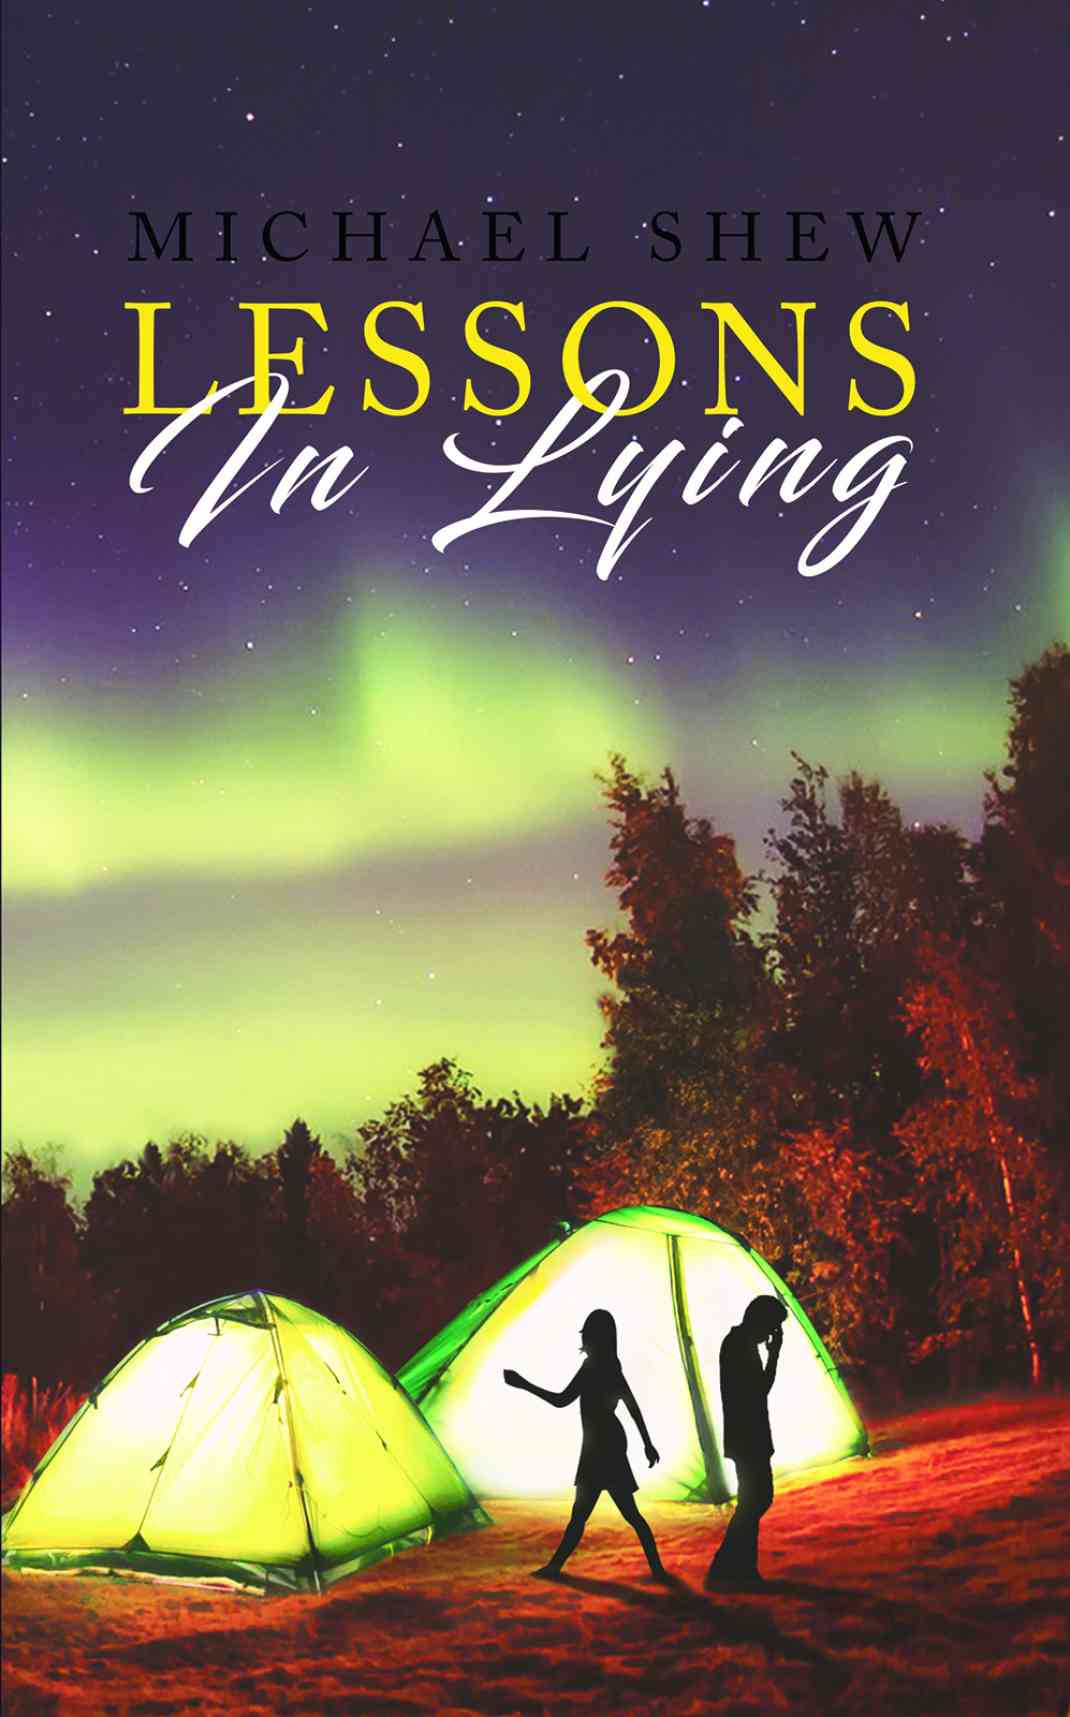 ‘Lessons in Lying’ by Michael Shew featured in Camden New Journal